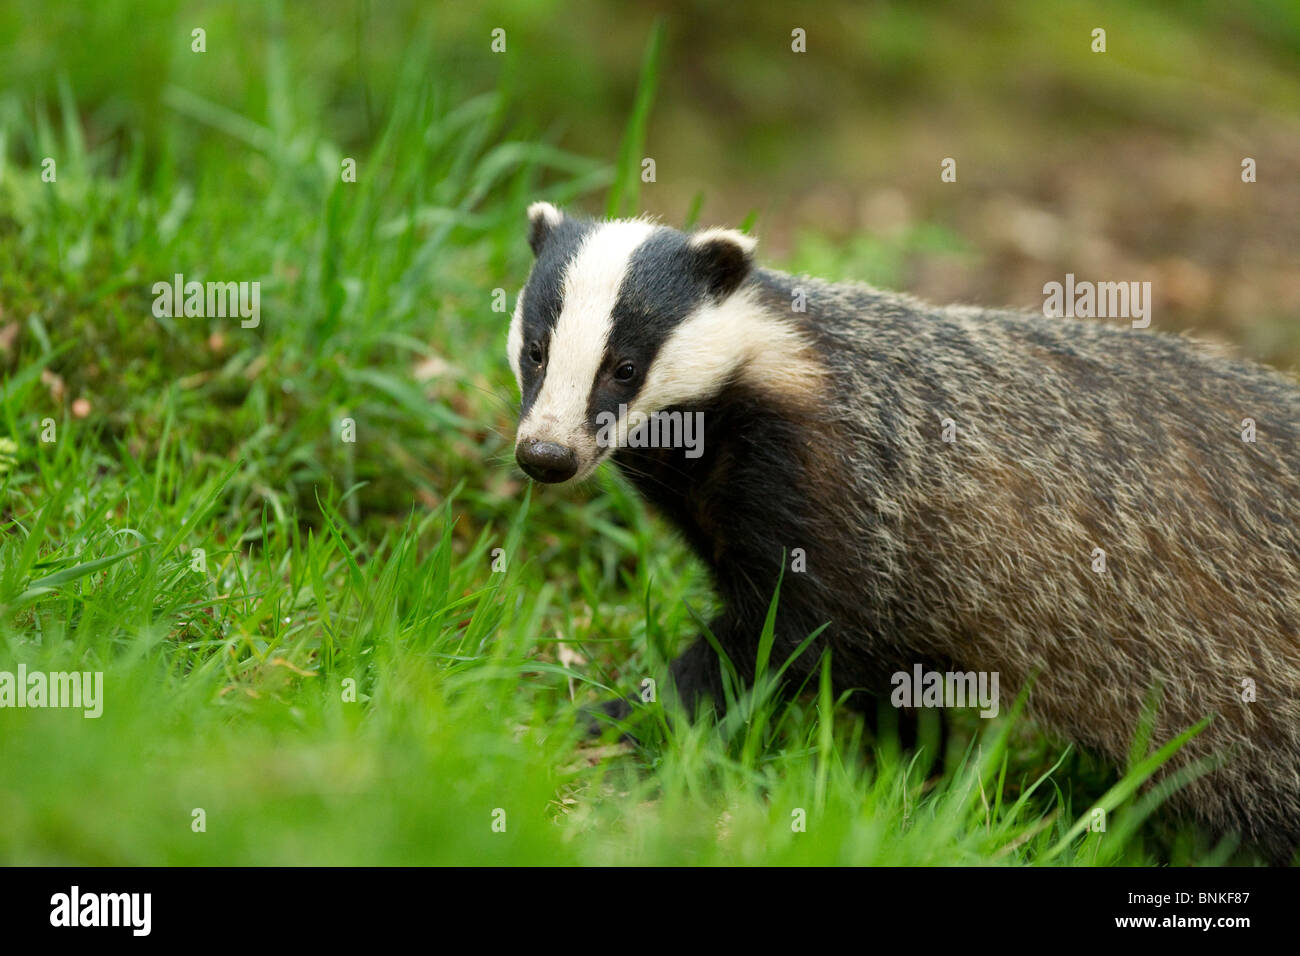 a badger looks up from feeding in a woodland Stock Photo